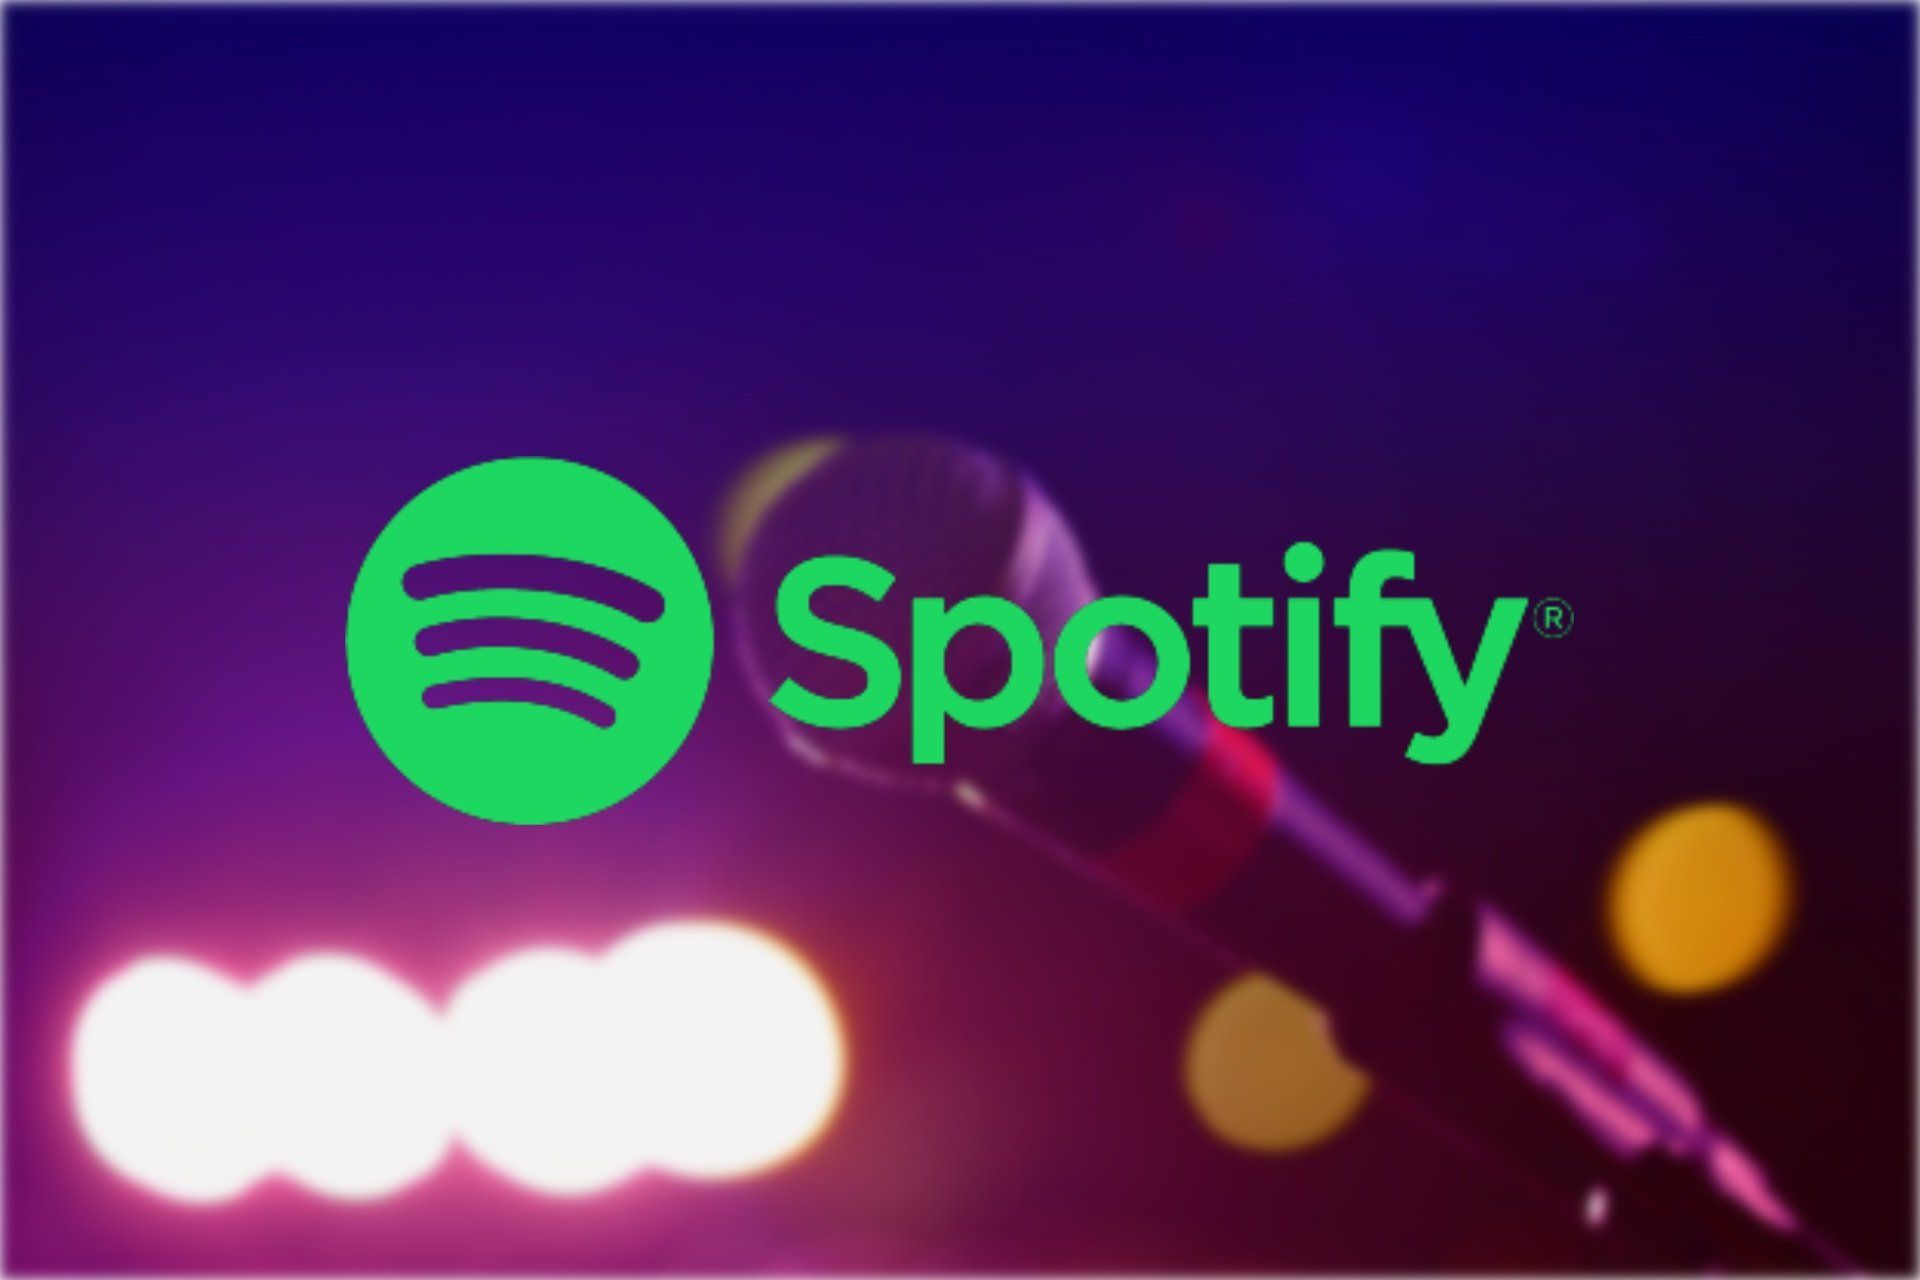 How to use Spotify Karaoke feature